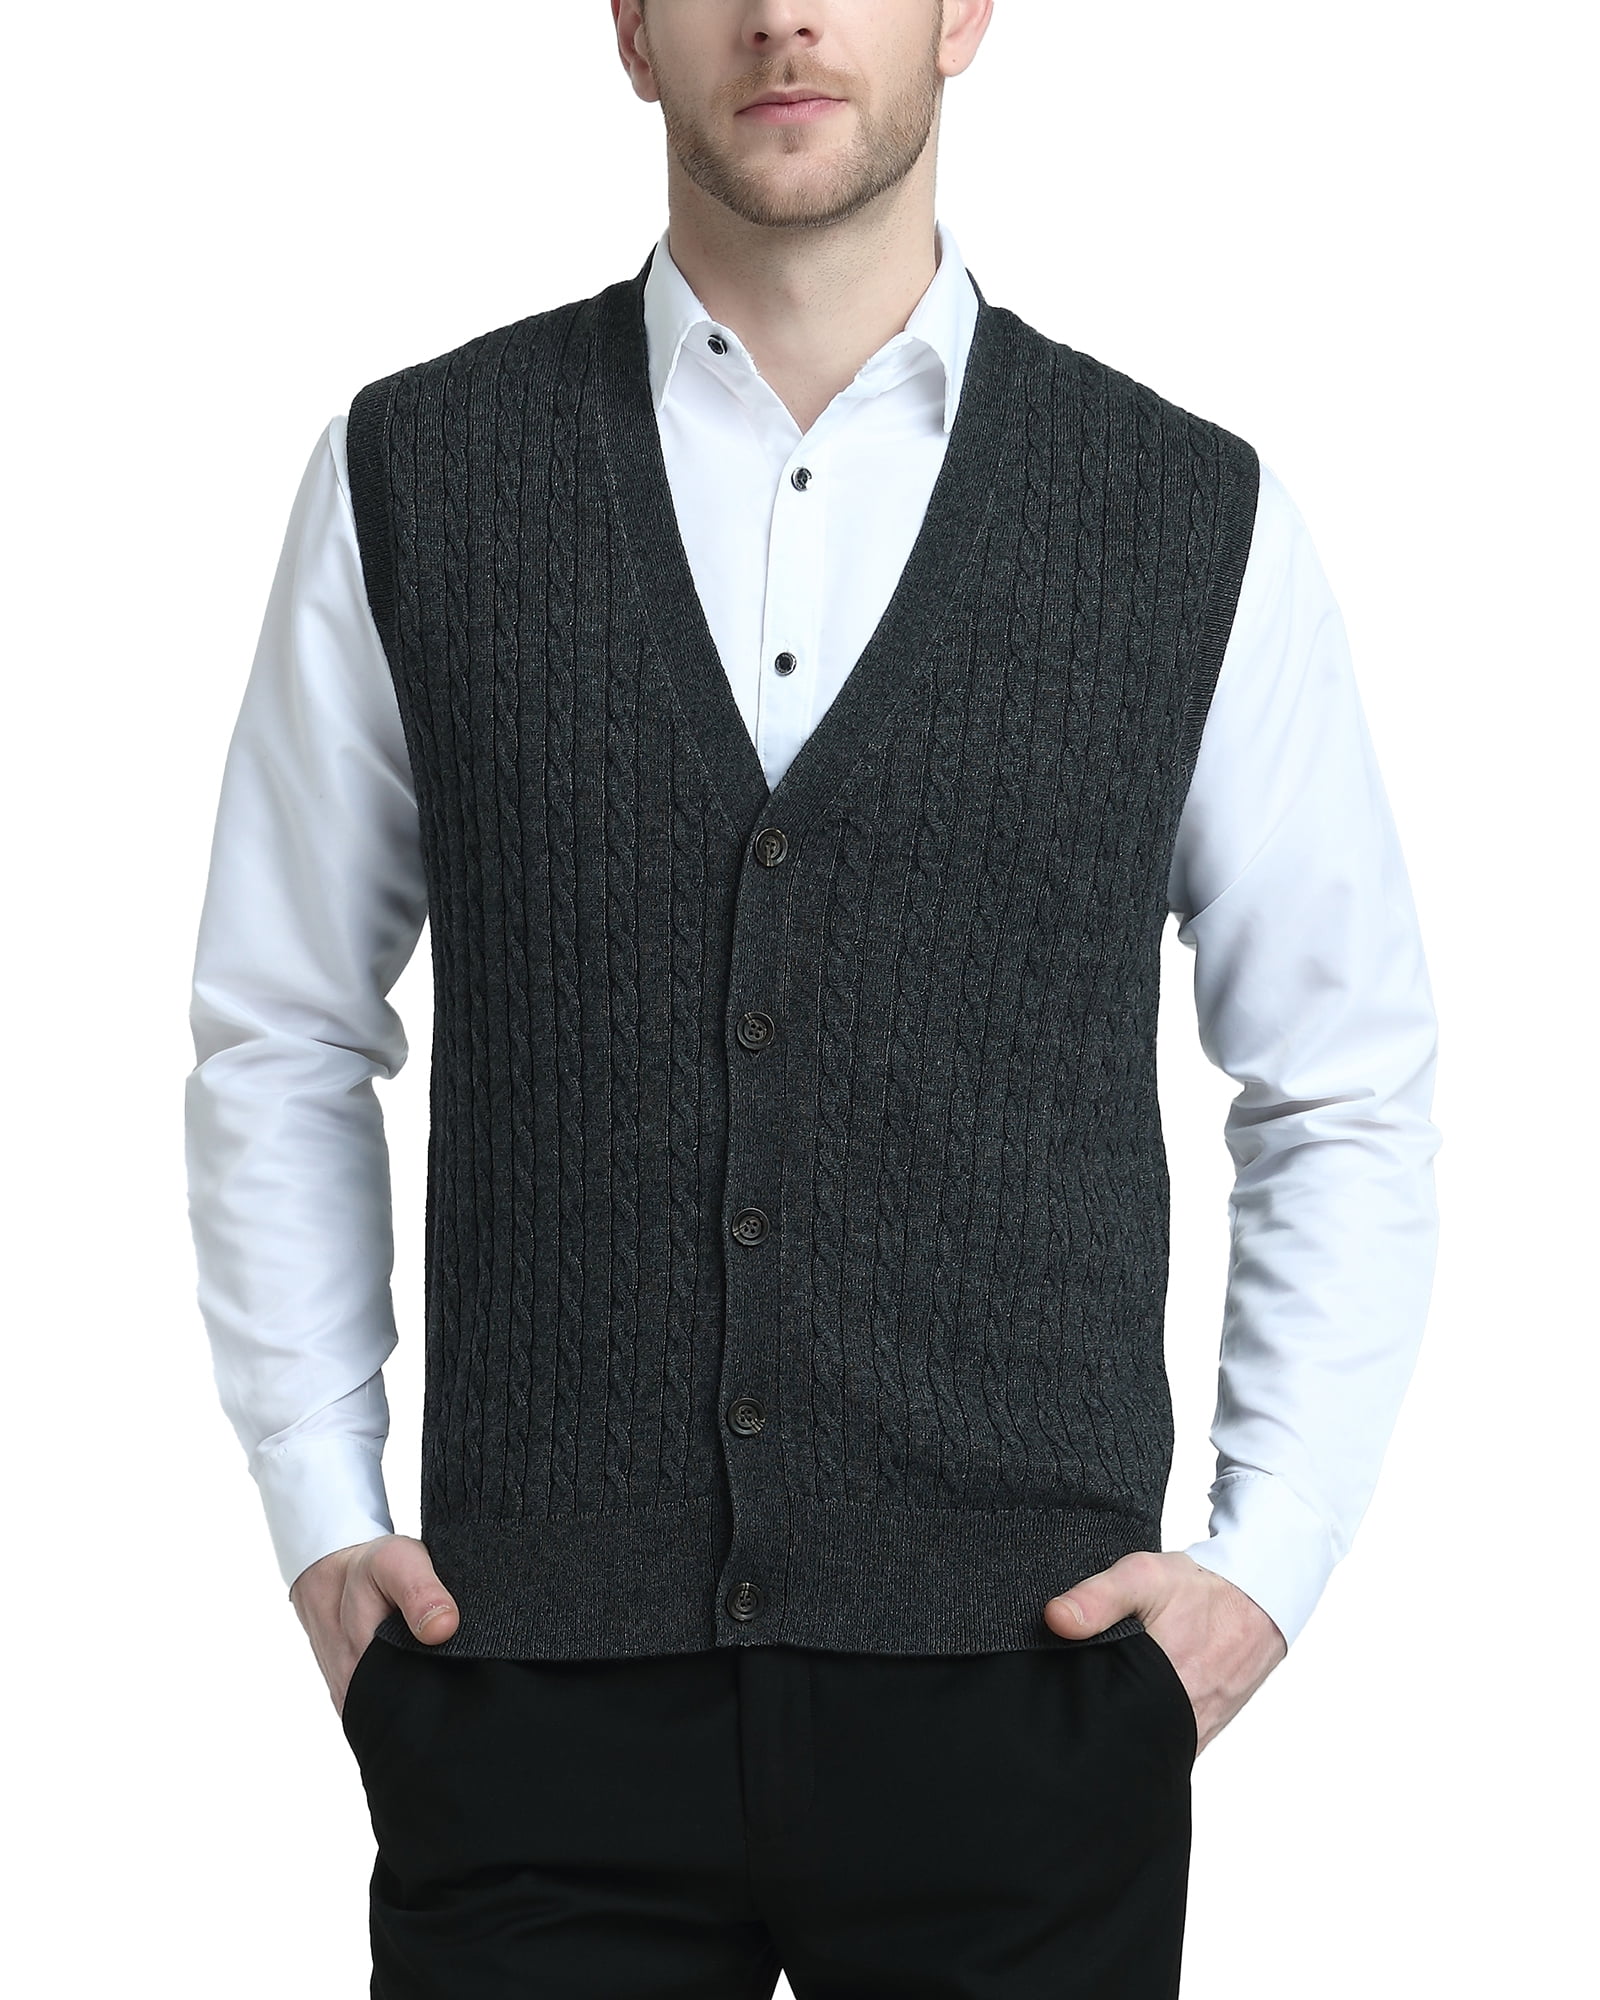 Men's Cable Knit Wool Blended Sweater Vest V Neck Relaxed Fit Sleeveless  Pullovers